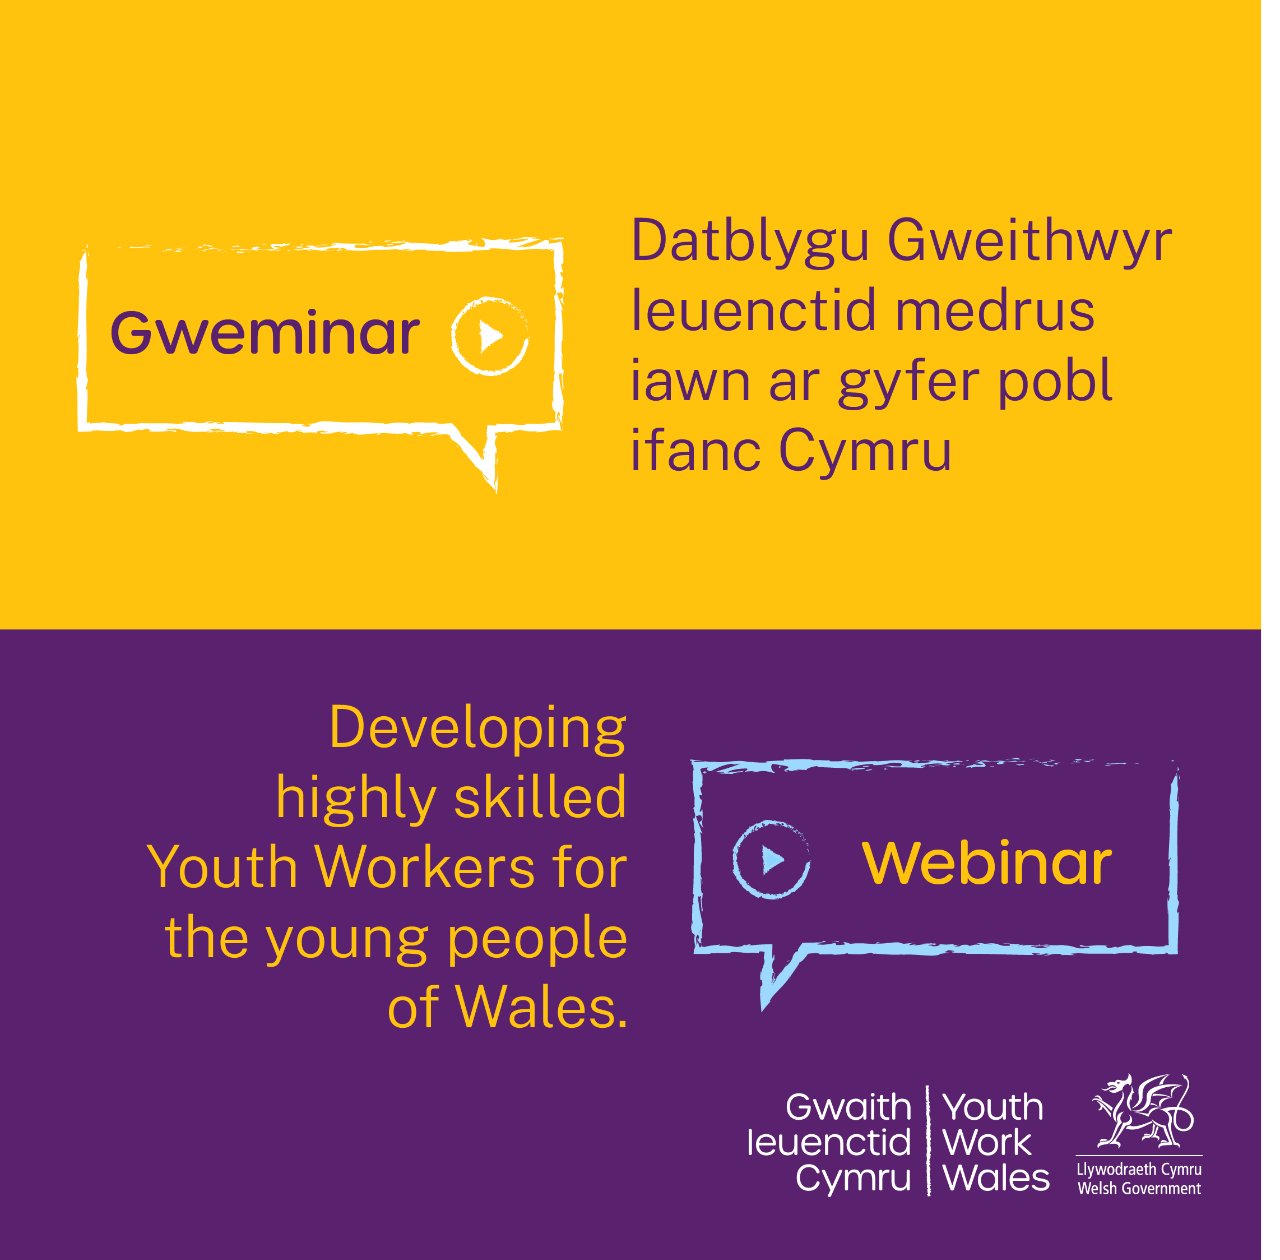 WEBINAR: Developing highly skilled Youth Workers for the young people of Wales